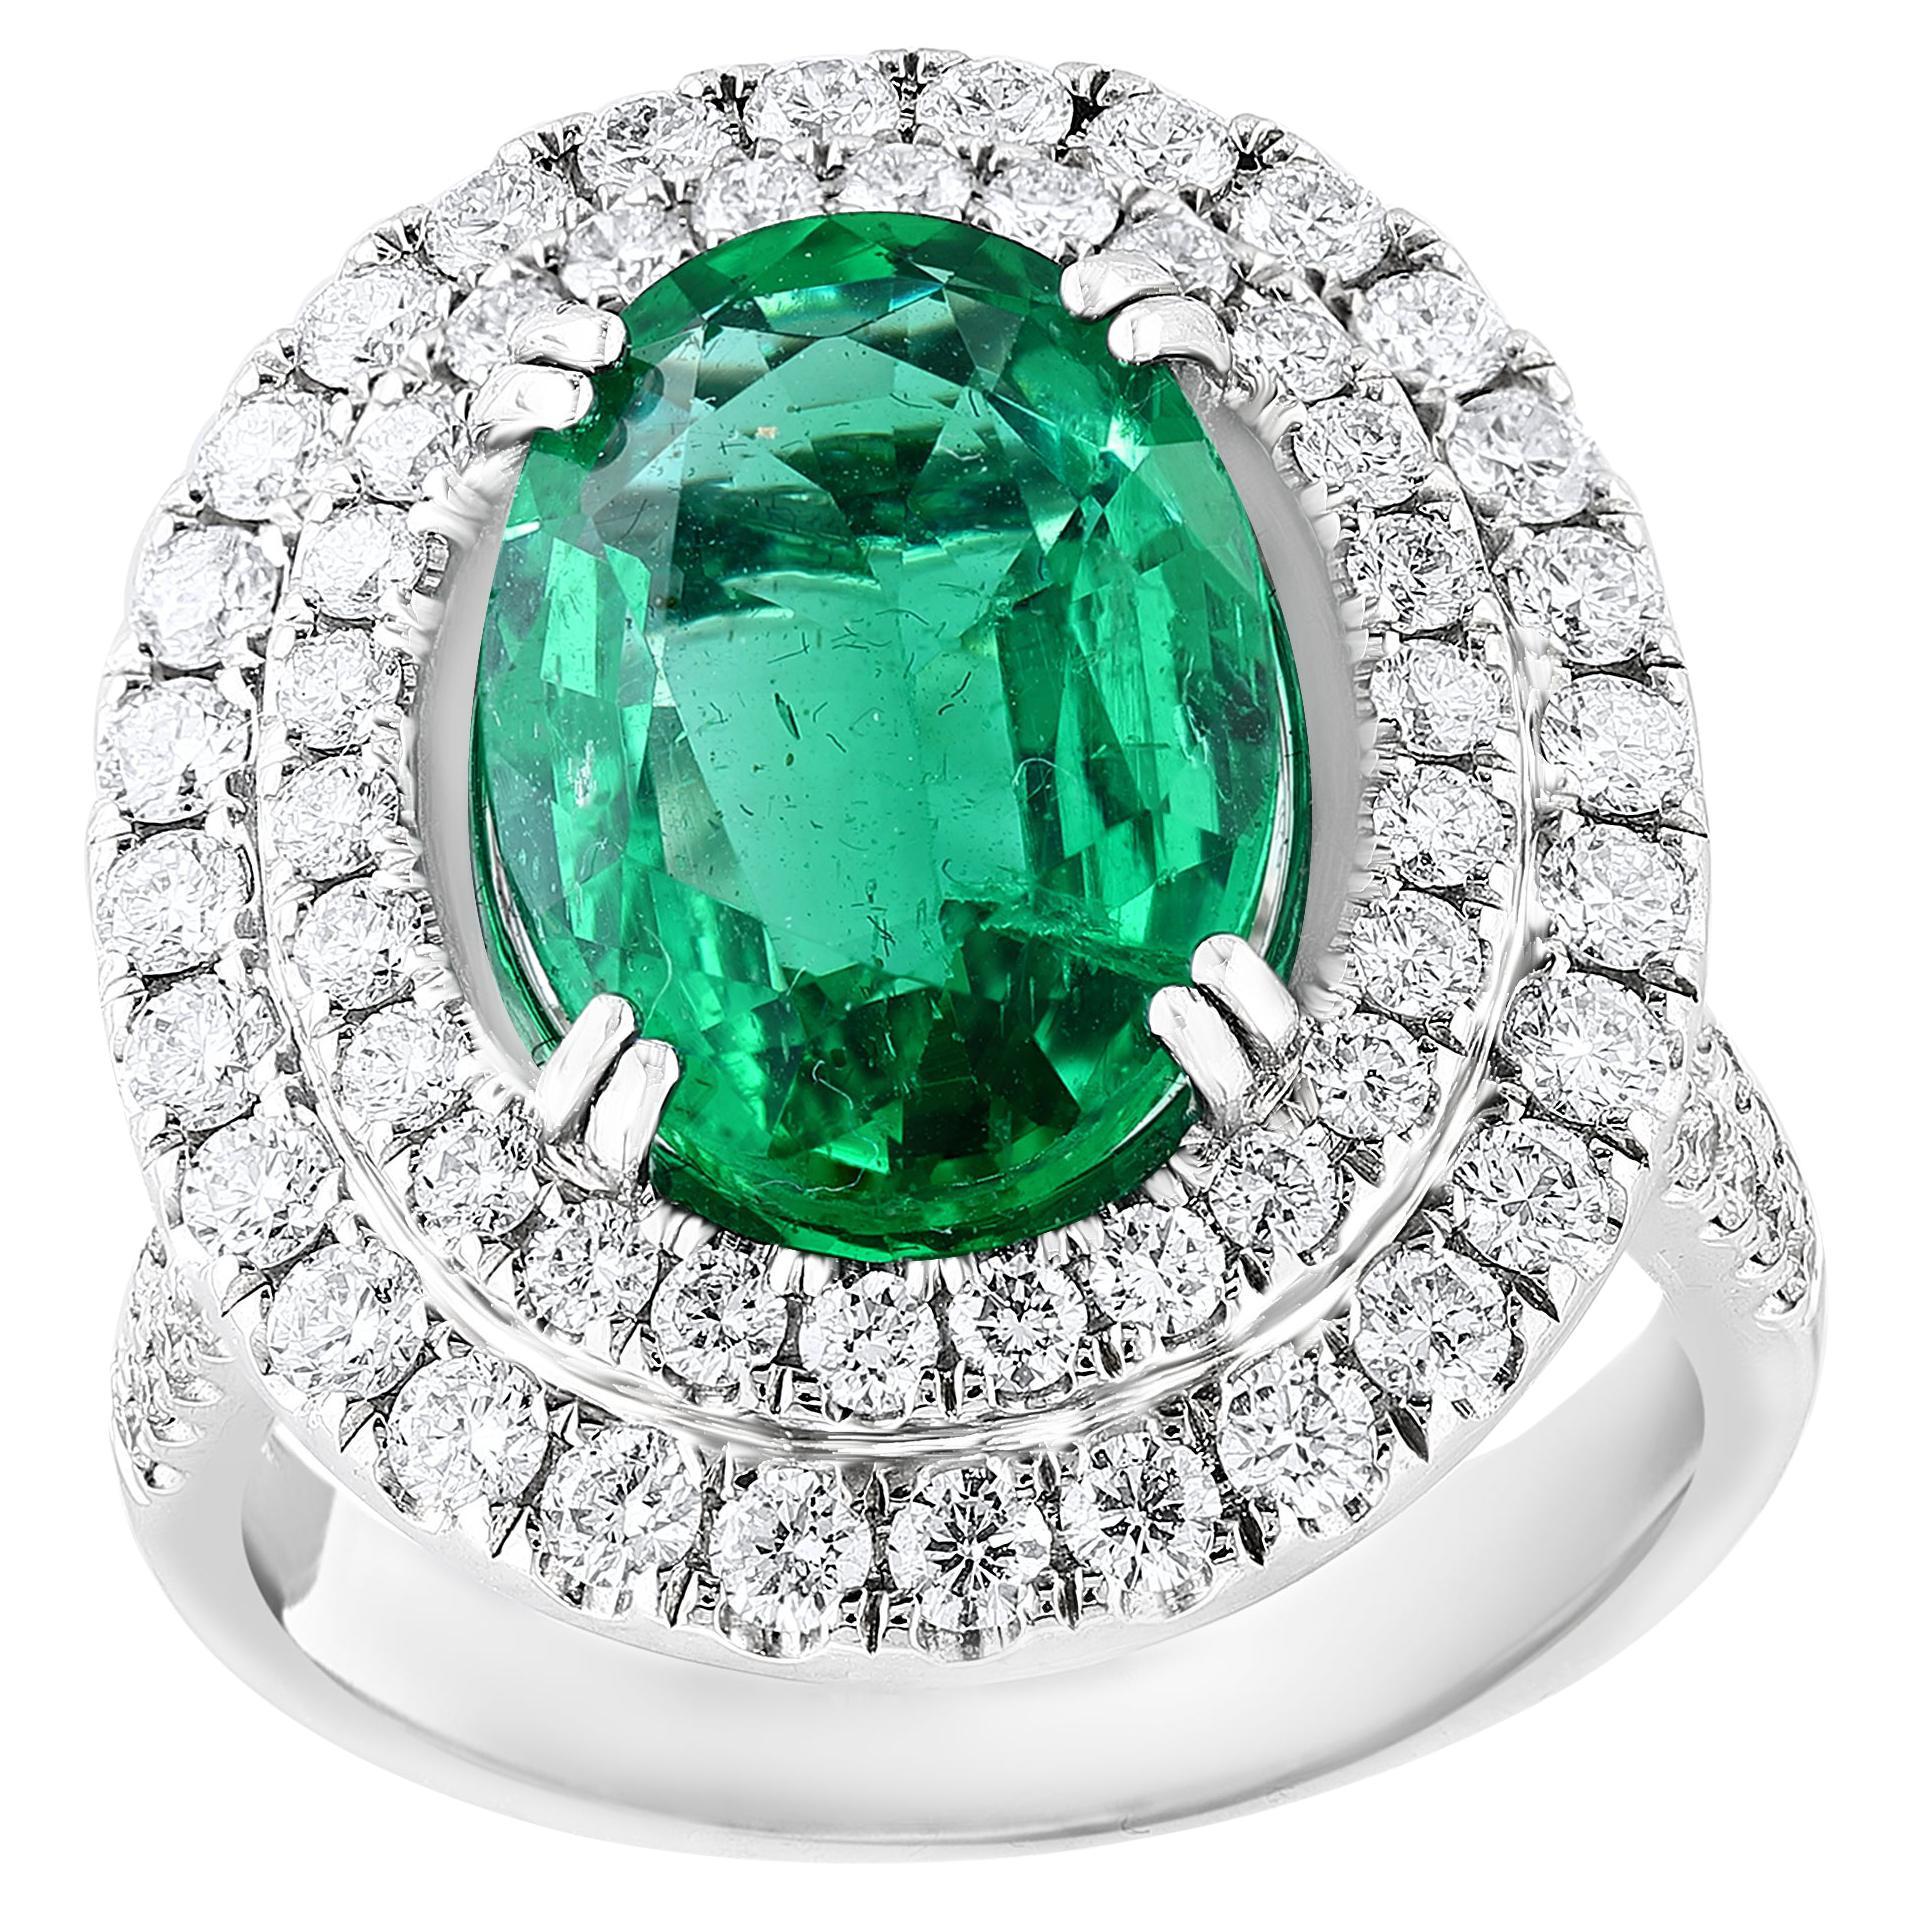 4.13 Carat Oval Cut Emerald and Diamond Engagement Ring in 18K White Gold